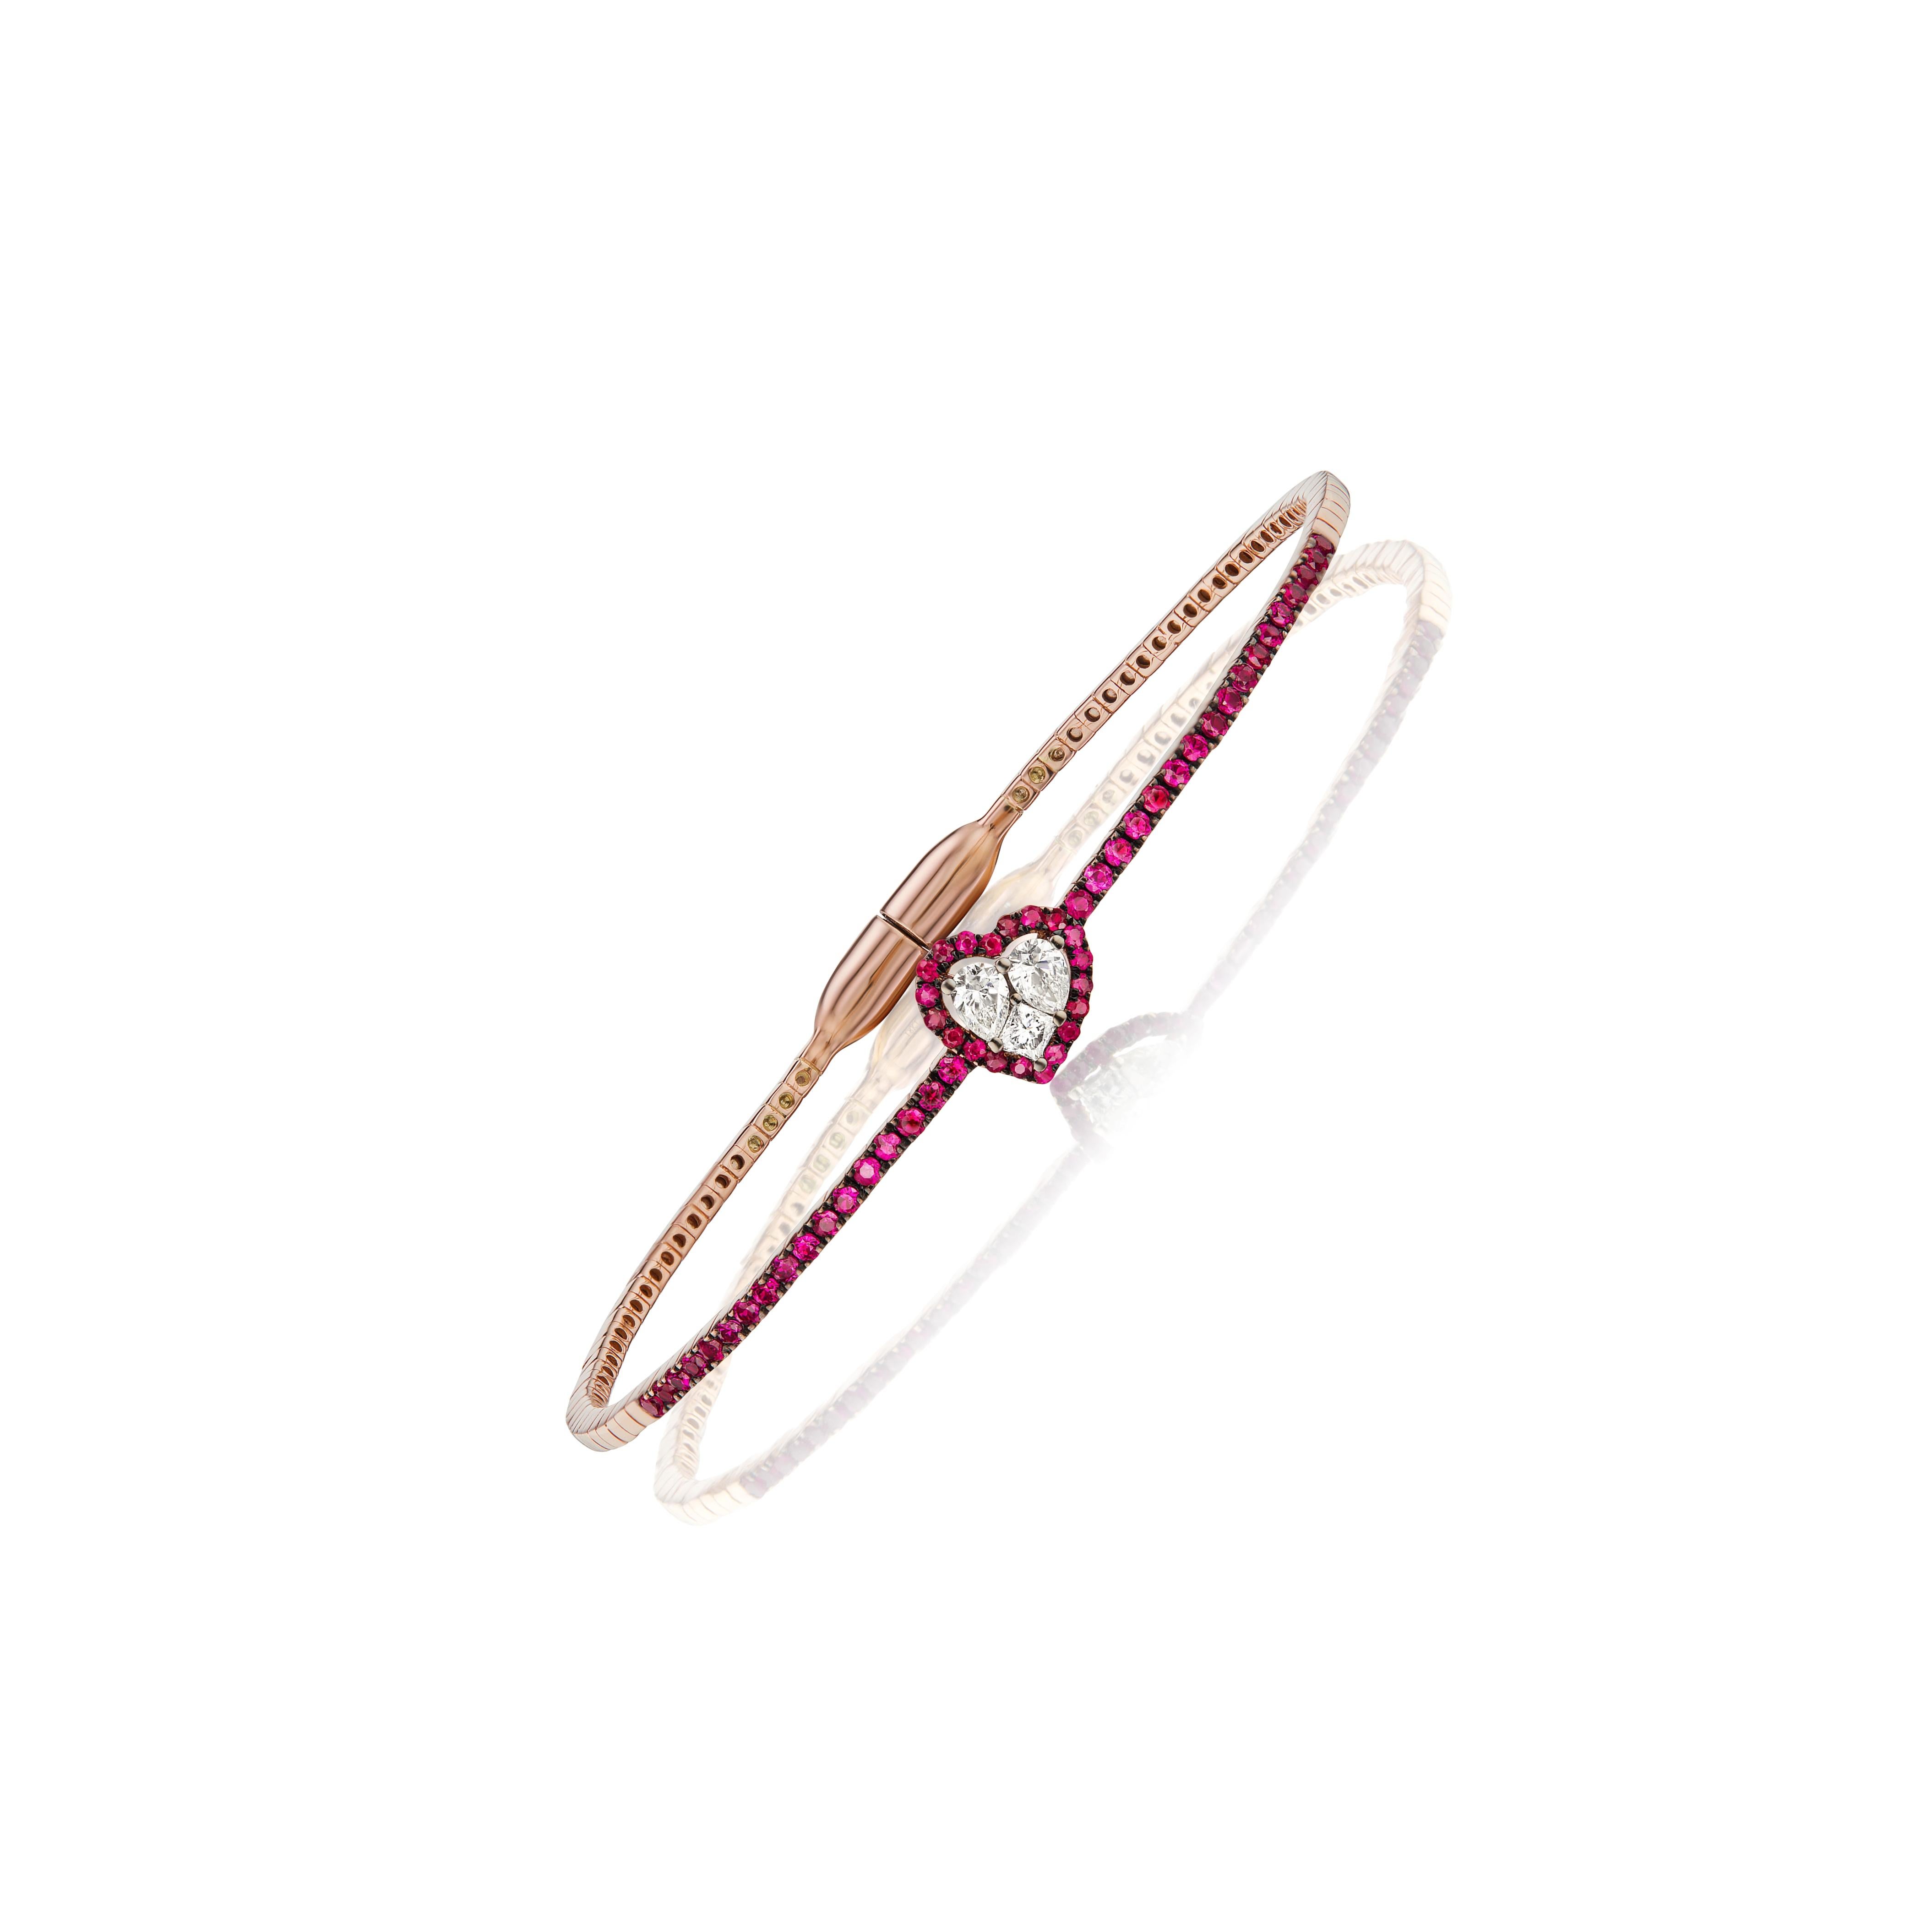 Introducing the Gemistry 1 Cttw. Ruby and Diamond Heart Shape Cluster Bangle in 18k Gold, a stunning symbol of love and commitment. The heart-shaped motif at the center of the bangle is made of a cluster of diamonds and halo of round rubies, adding